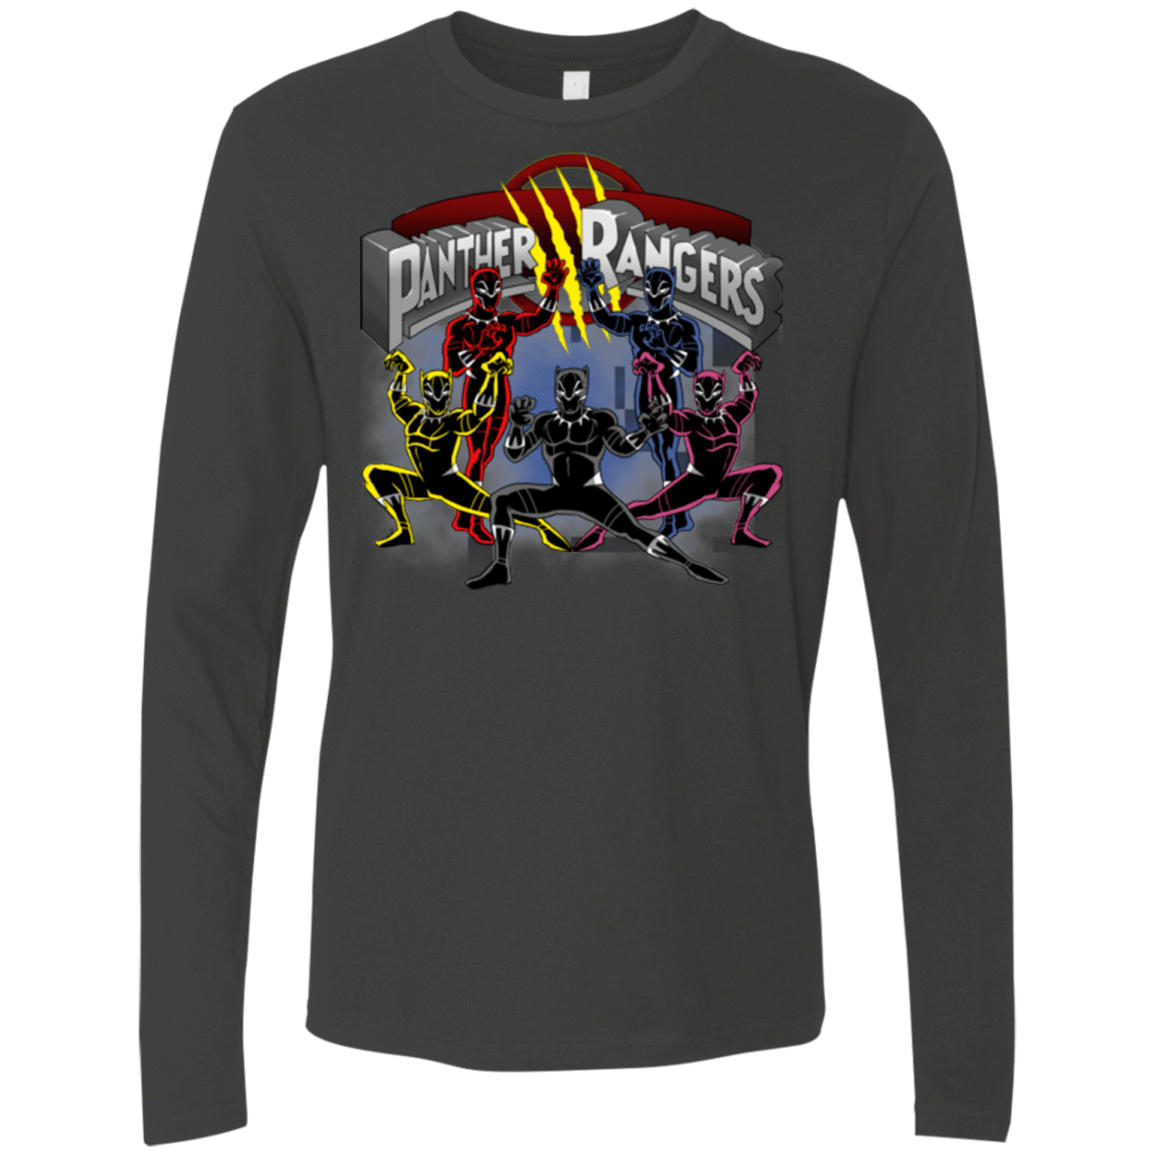 T-Shirts Heavy Metal / Small Panther Rangers Men's Premium Long Sleeve